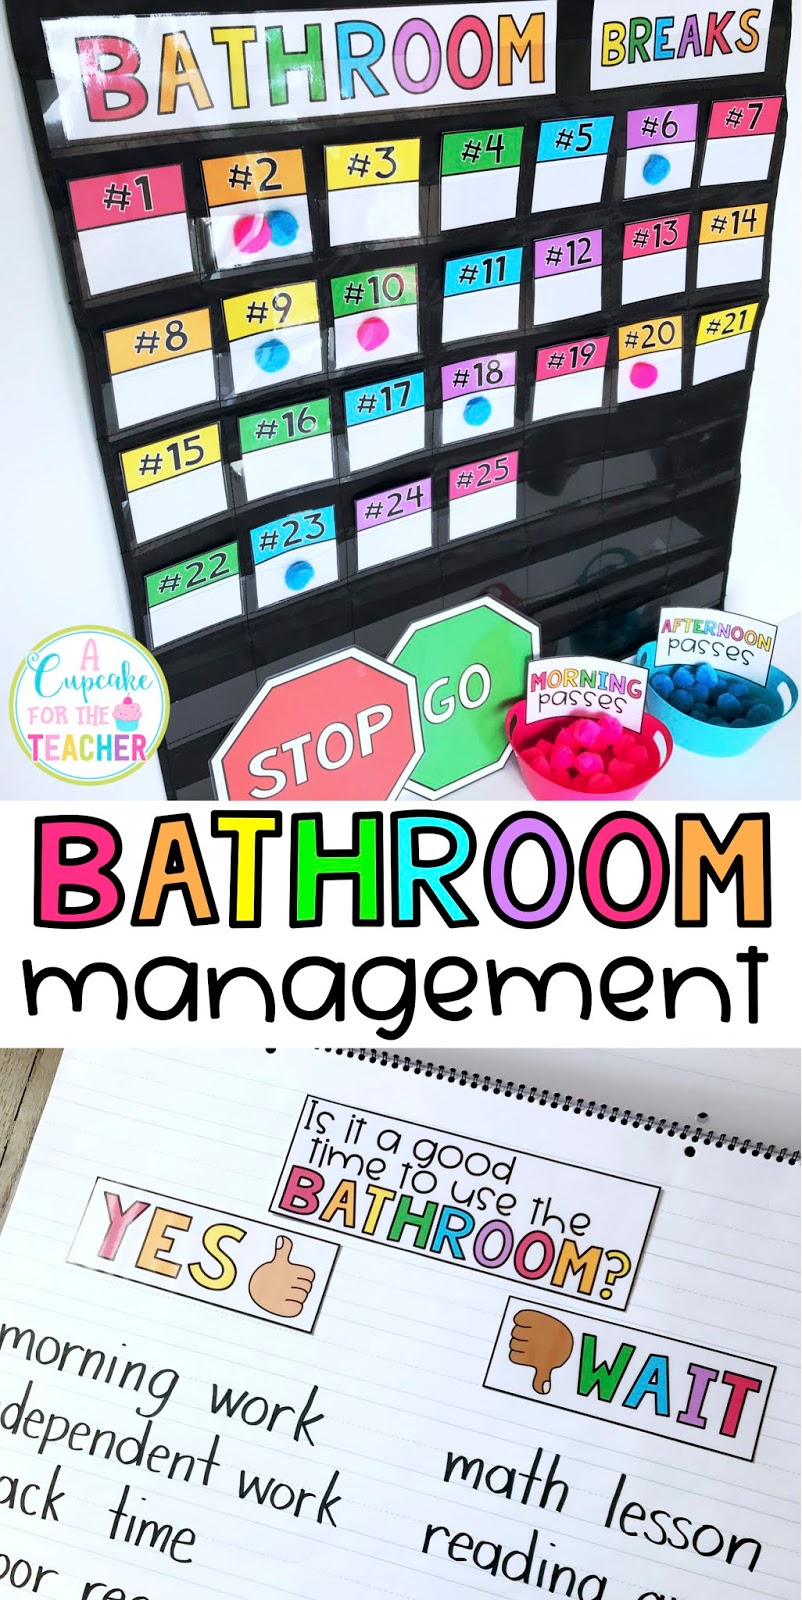 Discover these bathroom management strategies for your elementary classroom!